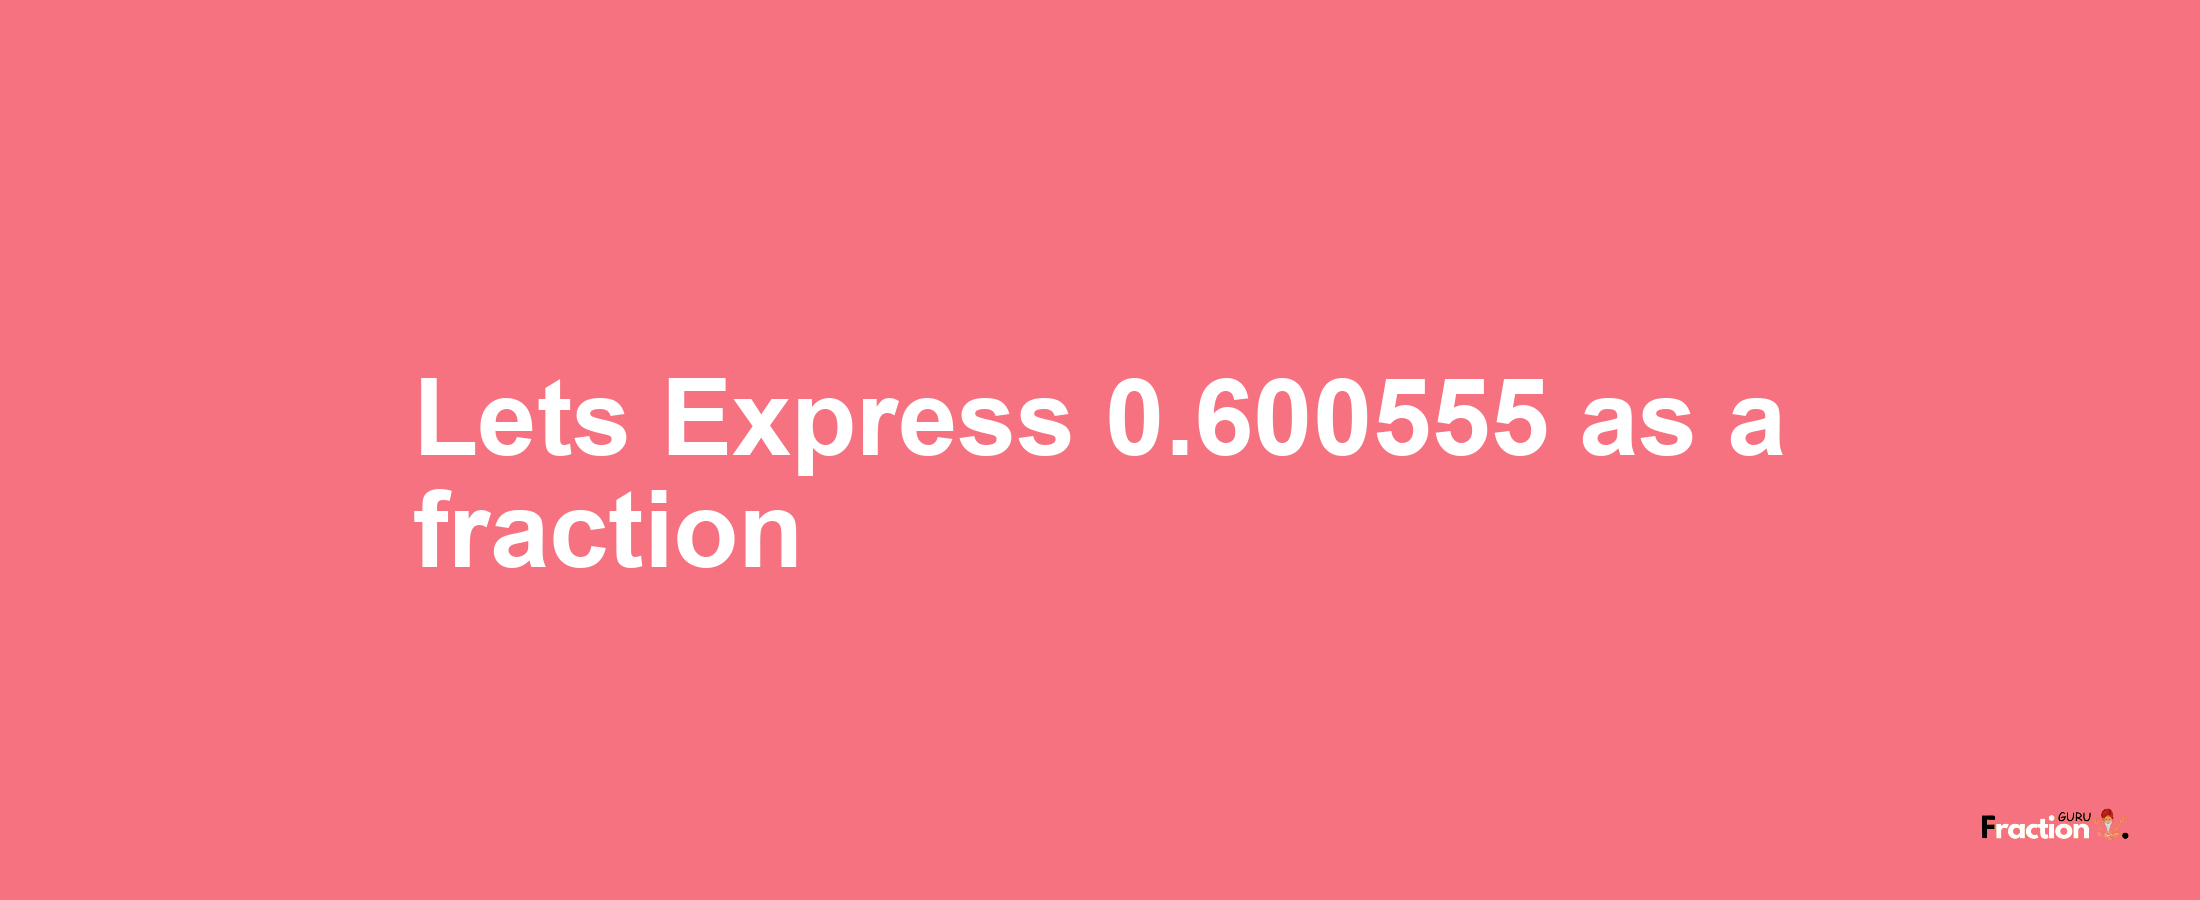 Lets Express 0.600555 as afraction